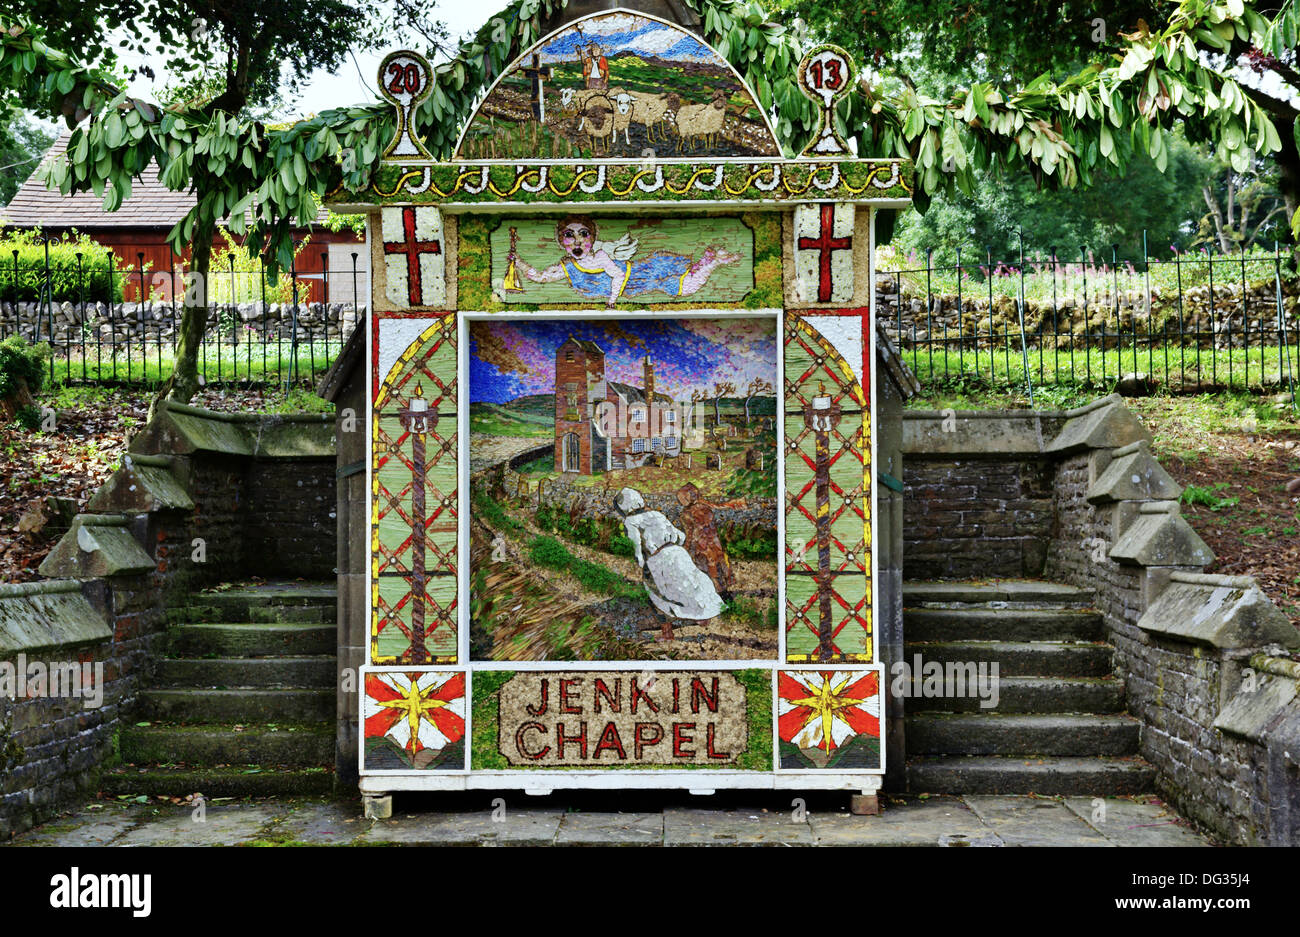 Well dressing at Jenkin Chapel, Derbyshire, England, an ancient traditional English custom Stock Photo